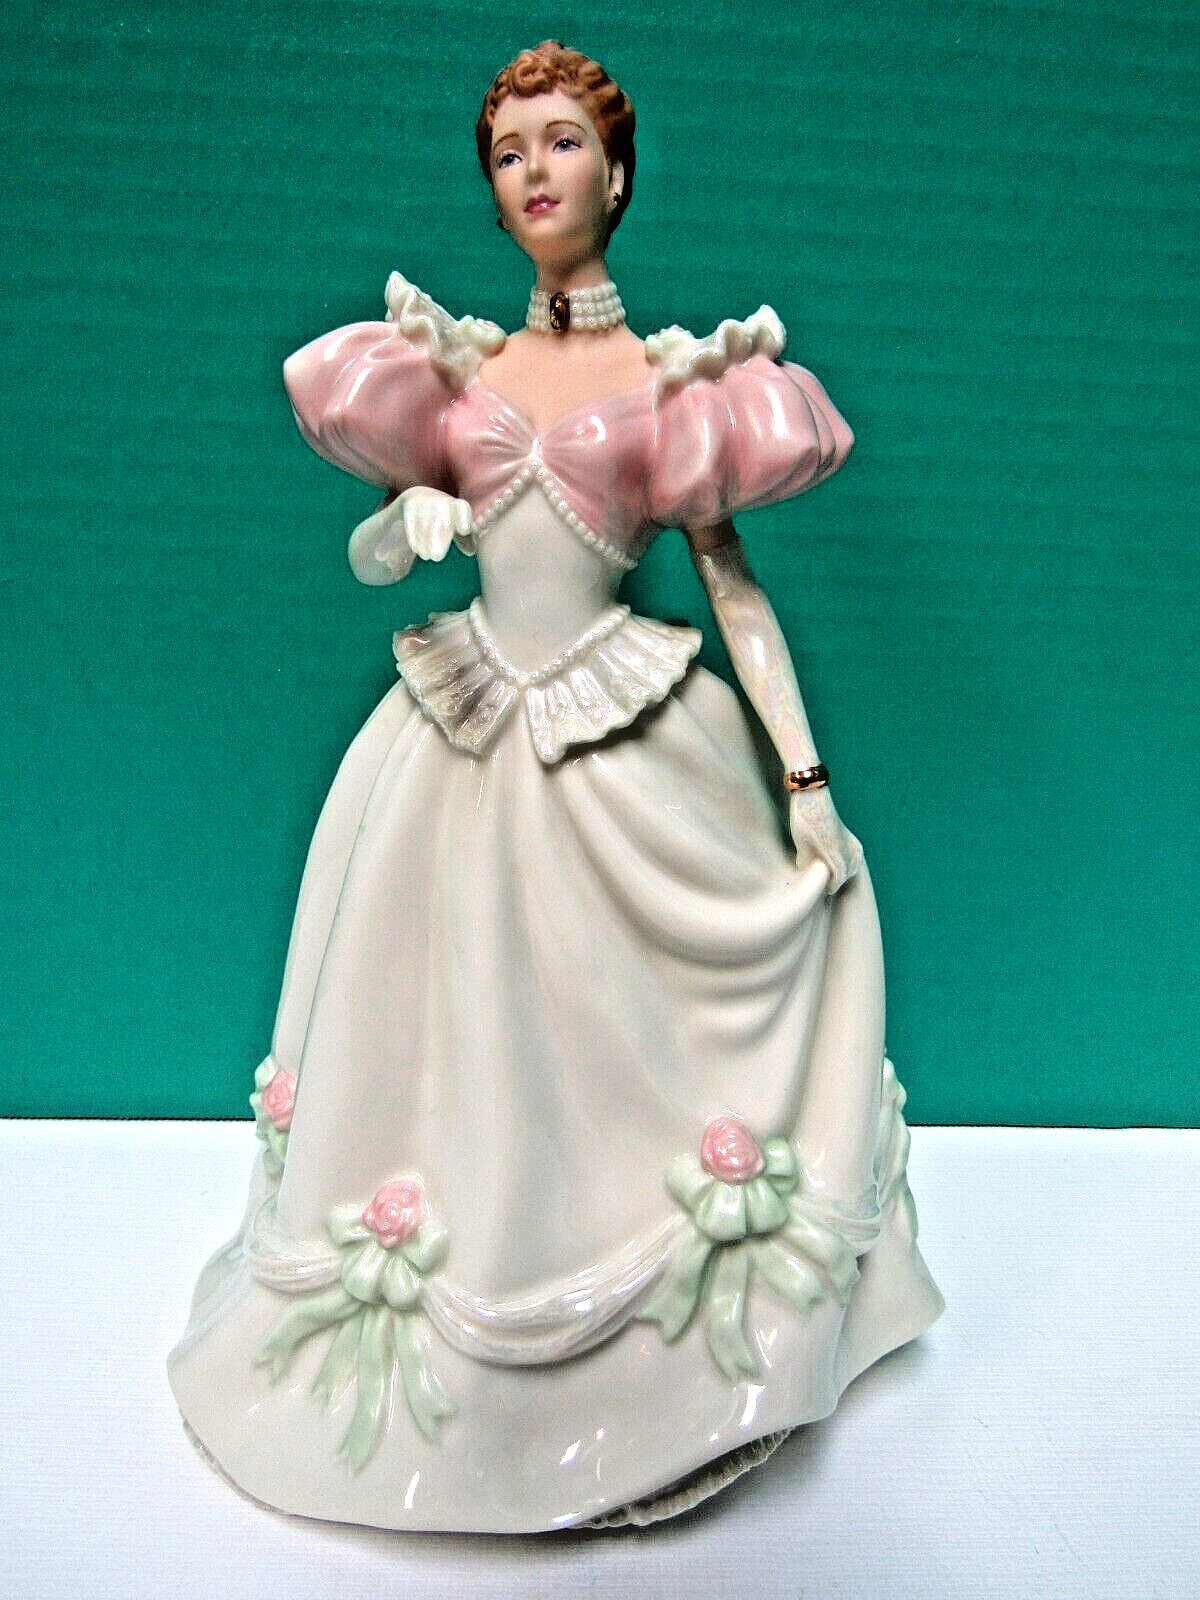 LENOX IVORY DEBUTANTE BALL FINE CHINA FIGURINE FROM THE GALA FASHION COLLECTION